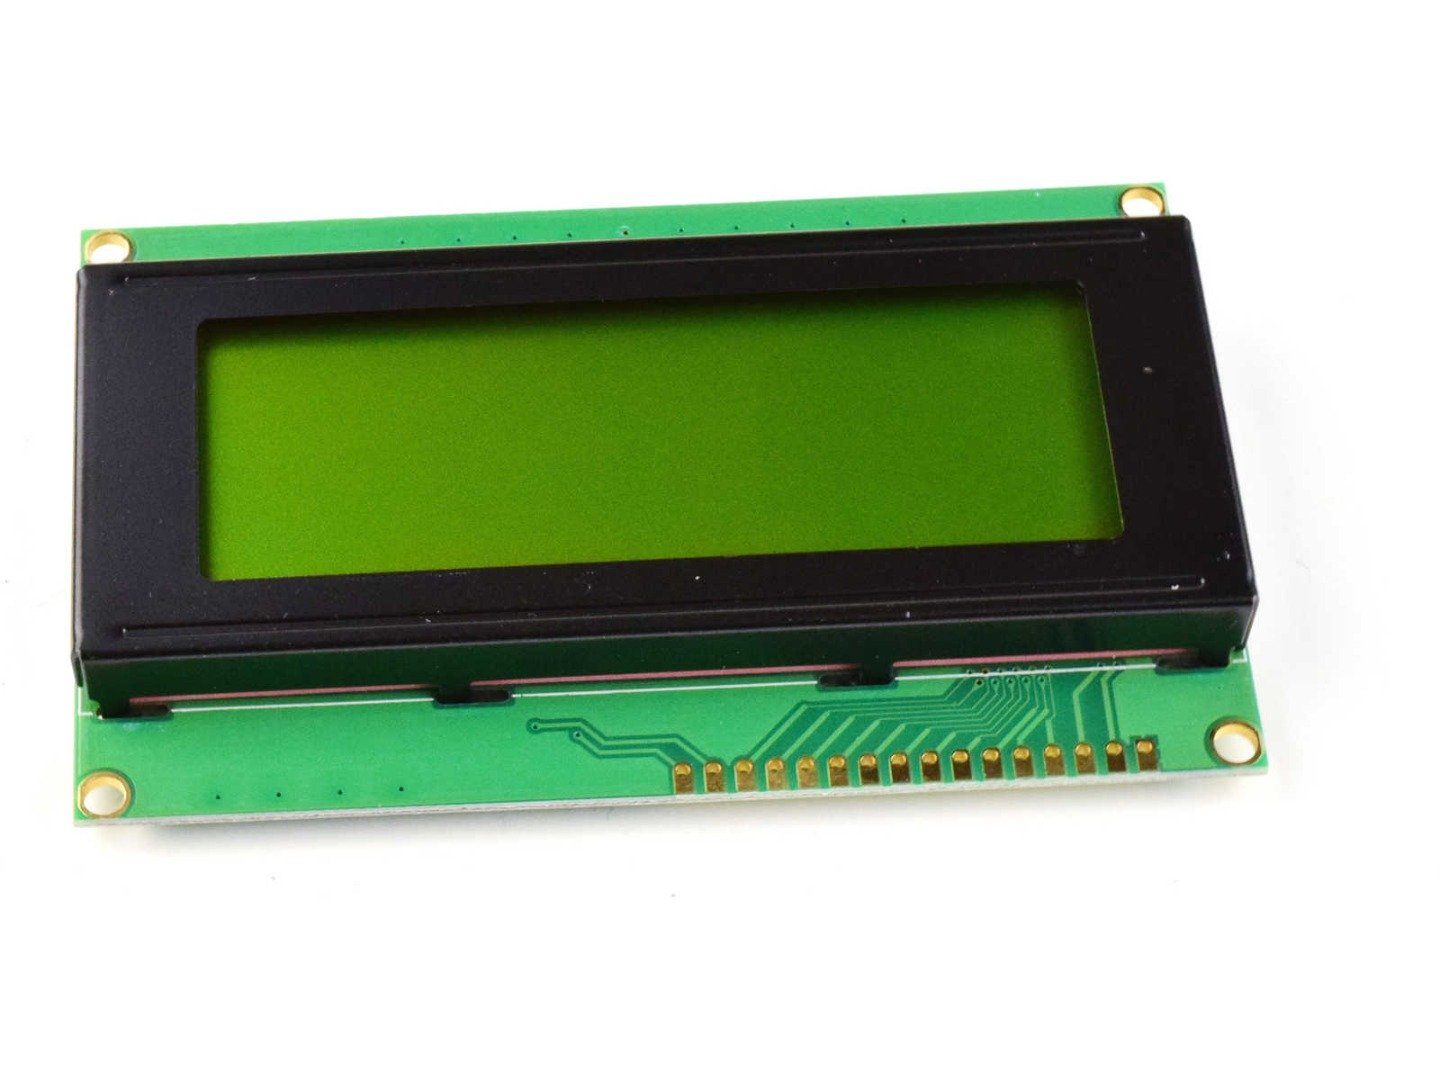 LCD 2004 20×4 Green, Yellow Backlight, parallel or I2C serial 9